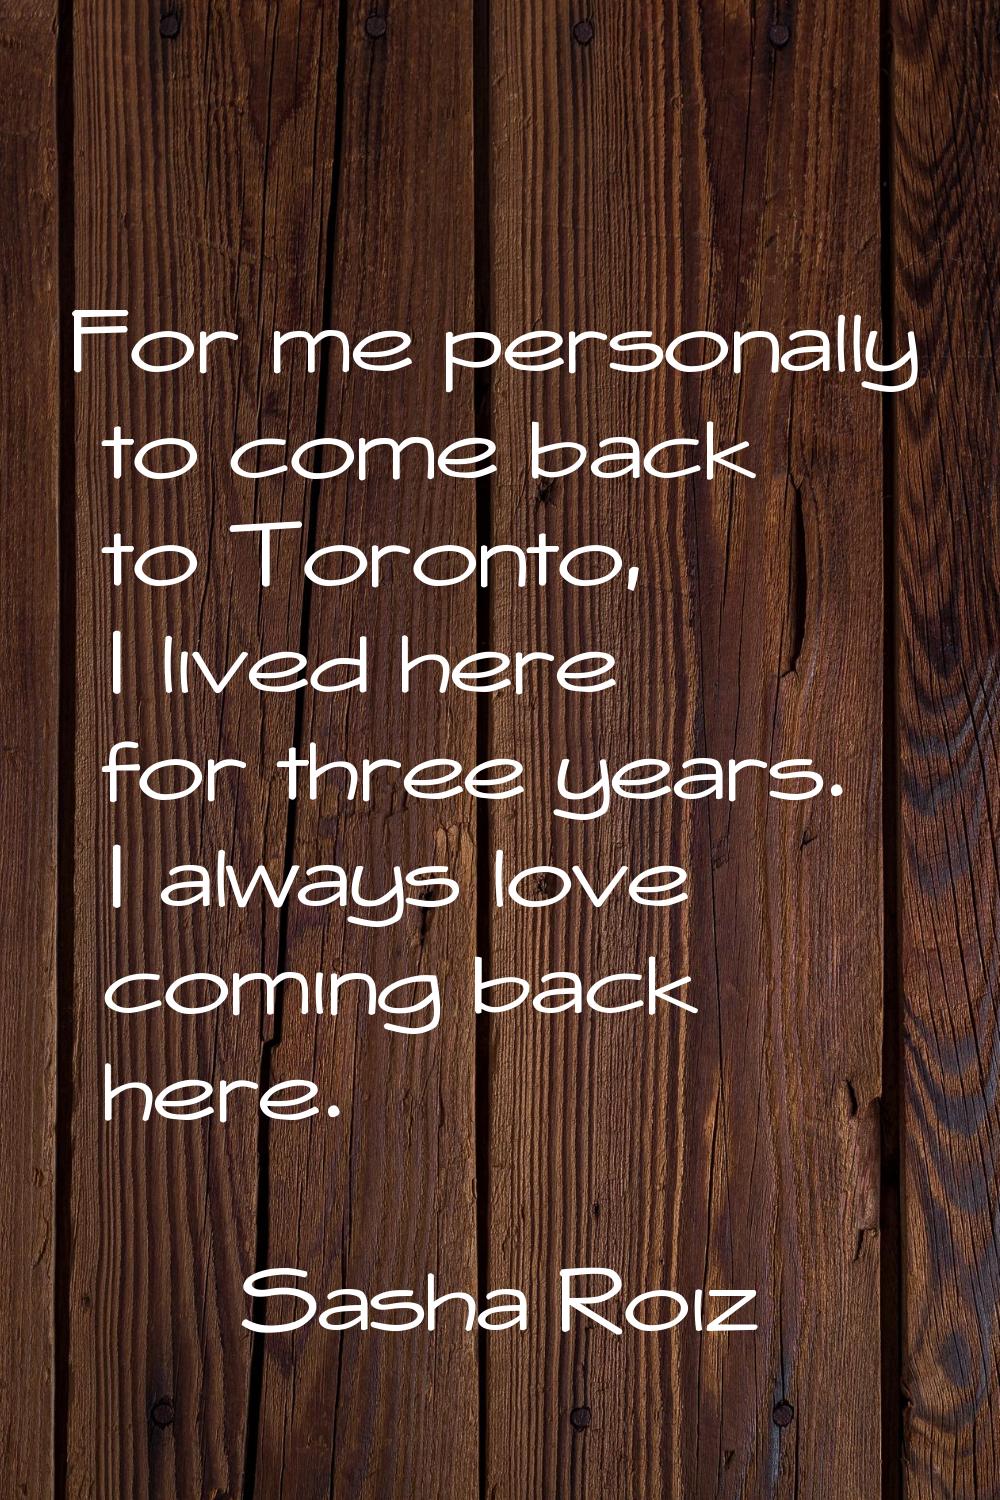 For me personally to come back to Toronto, I lived here for three years. I always love coming back 